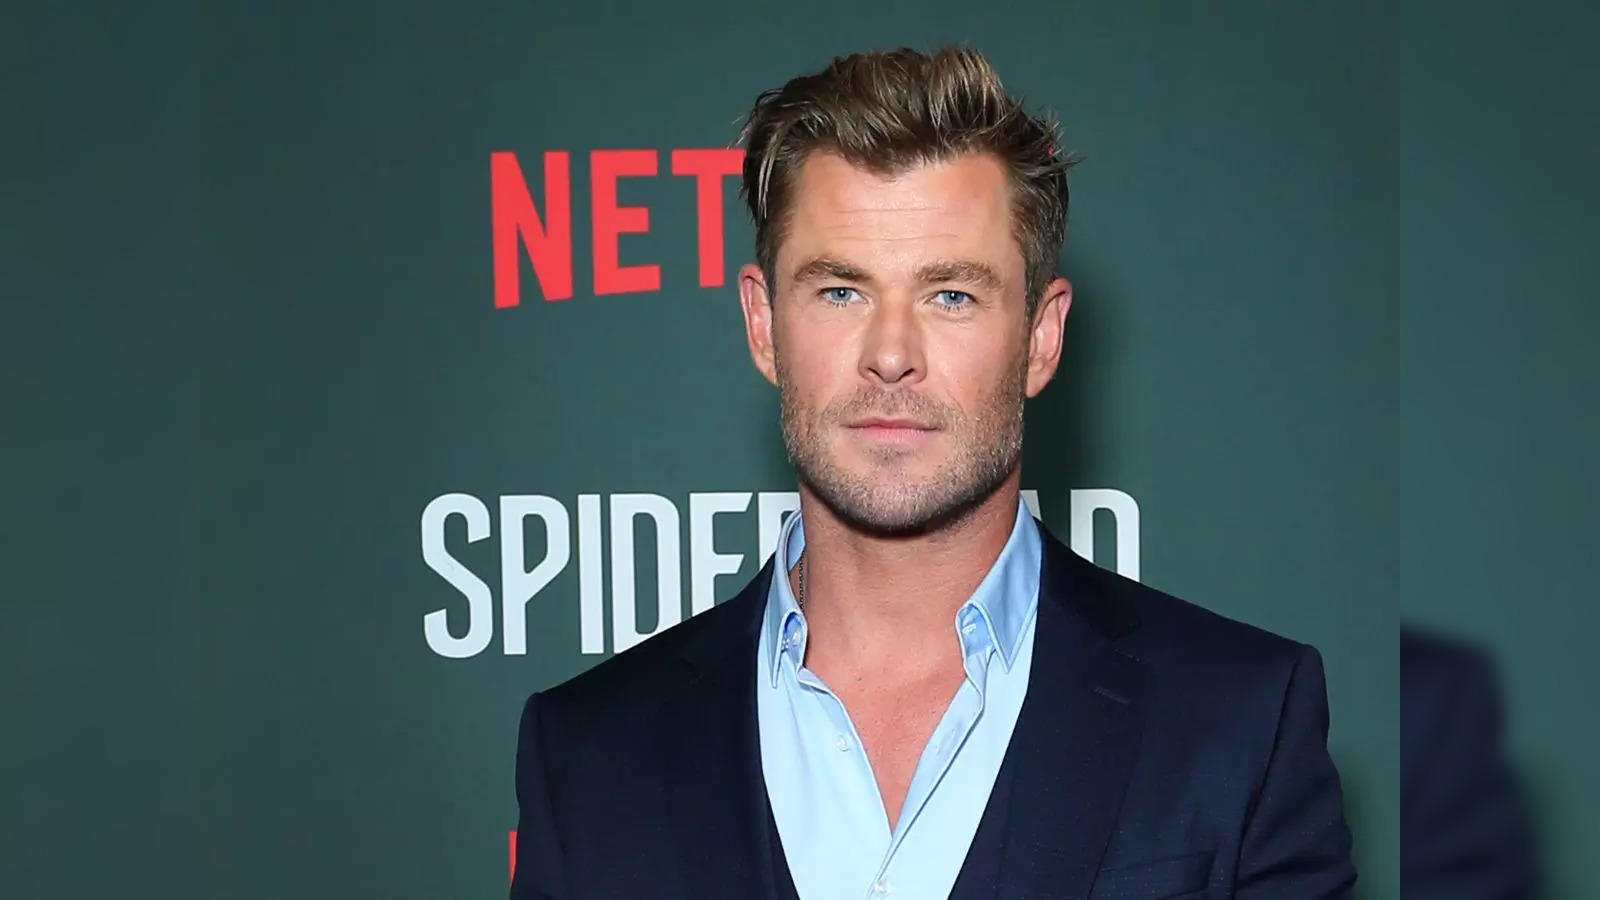 Chris Hemsworth Alzheimer's Disease: Chris Hemsworth may take a hiatus from  Hollywood amid Alzheimer's diagnosis - The Economic Times